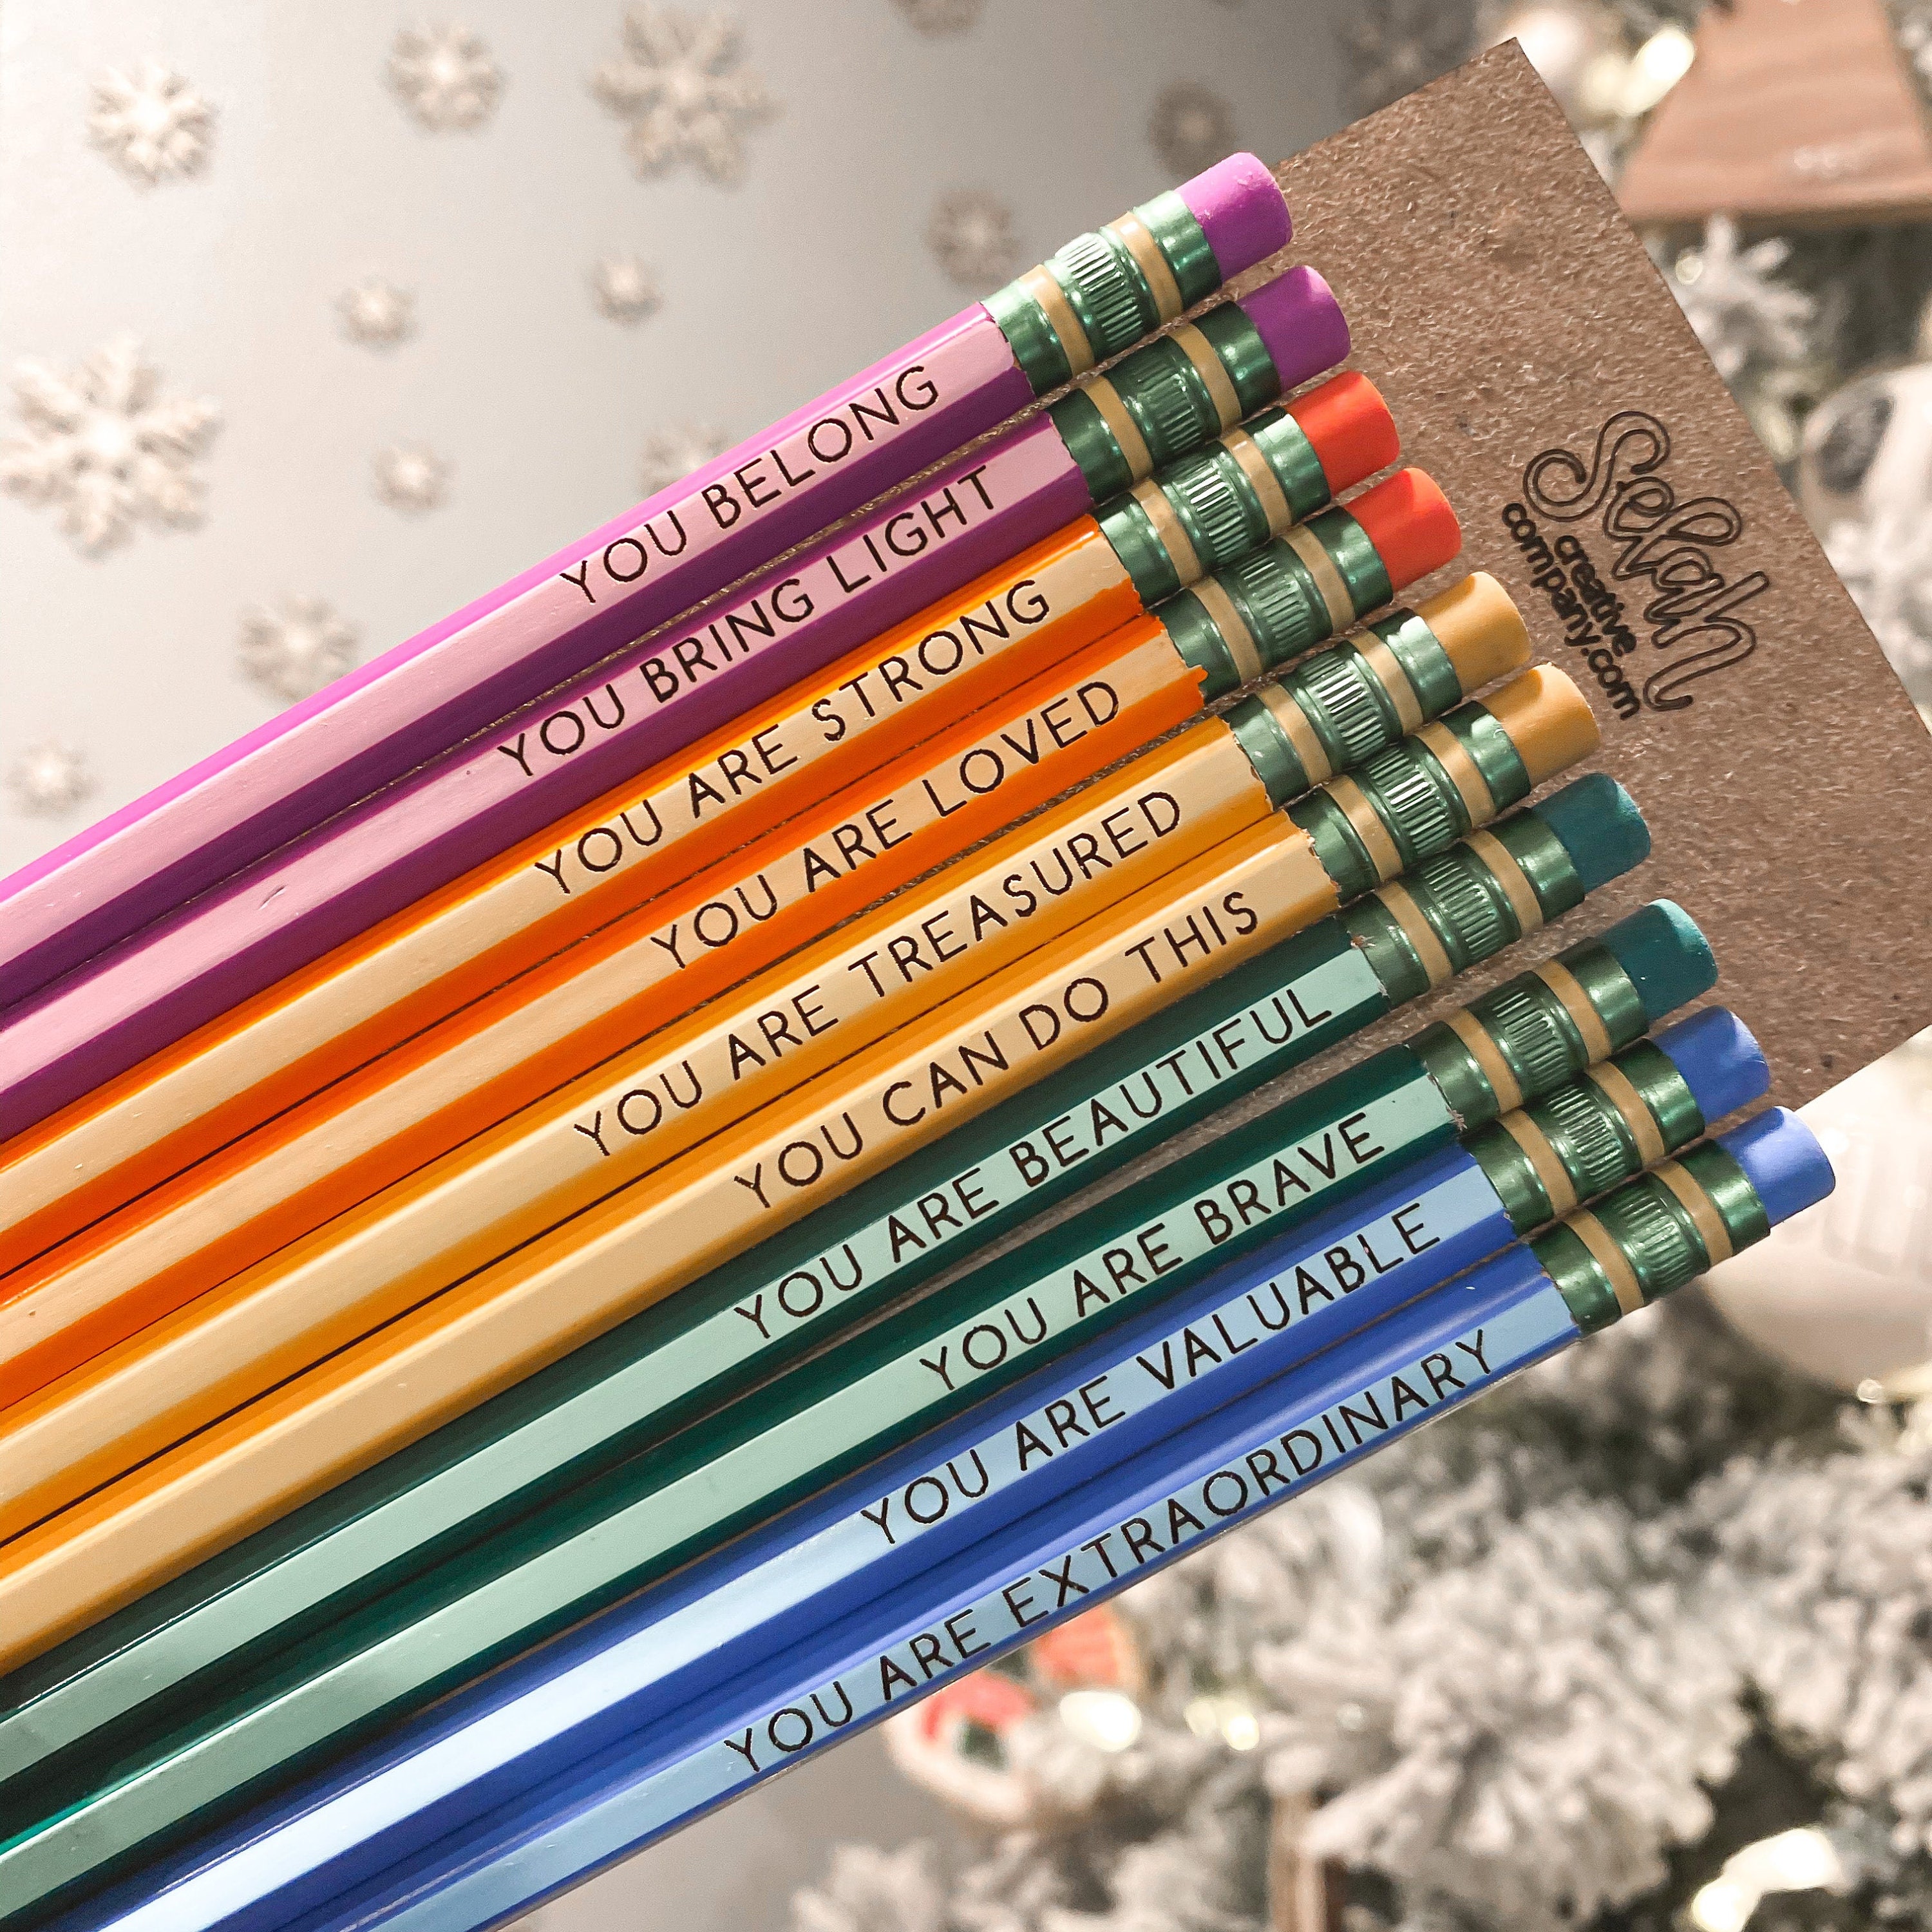 DUTACK Affirmation Pencil Set, Personalized Motivational Praise Wooden  Pencils, Pencil Set for Sketching and Drawing, Inspirational Pencils For